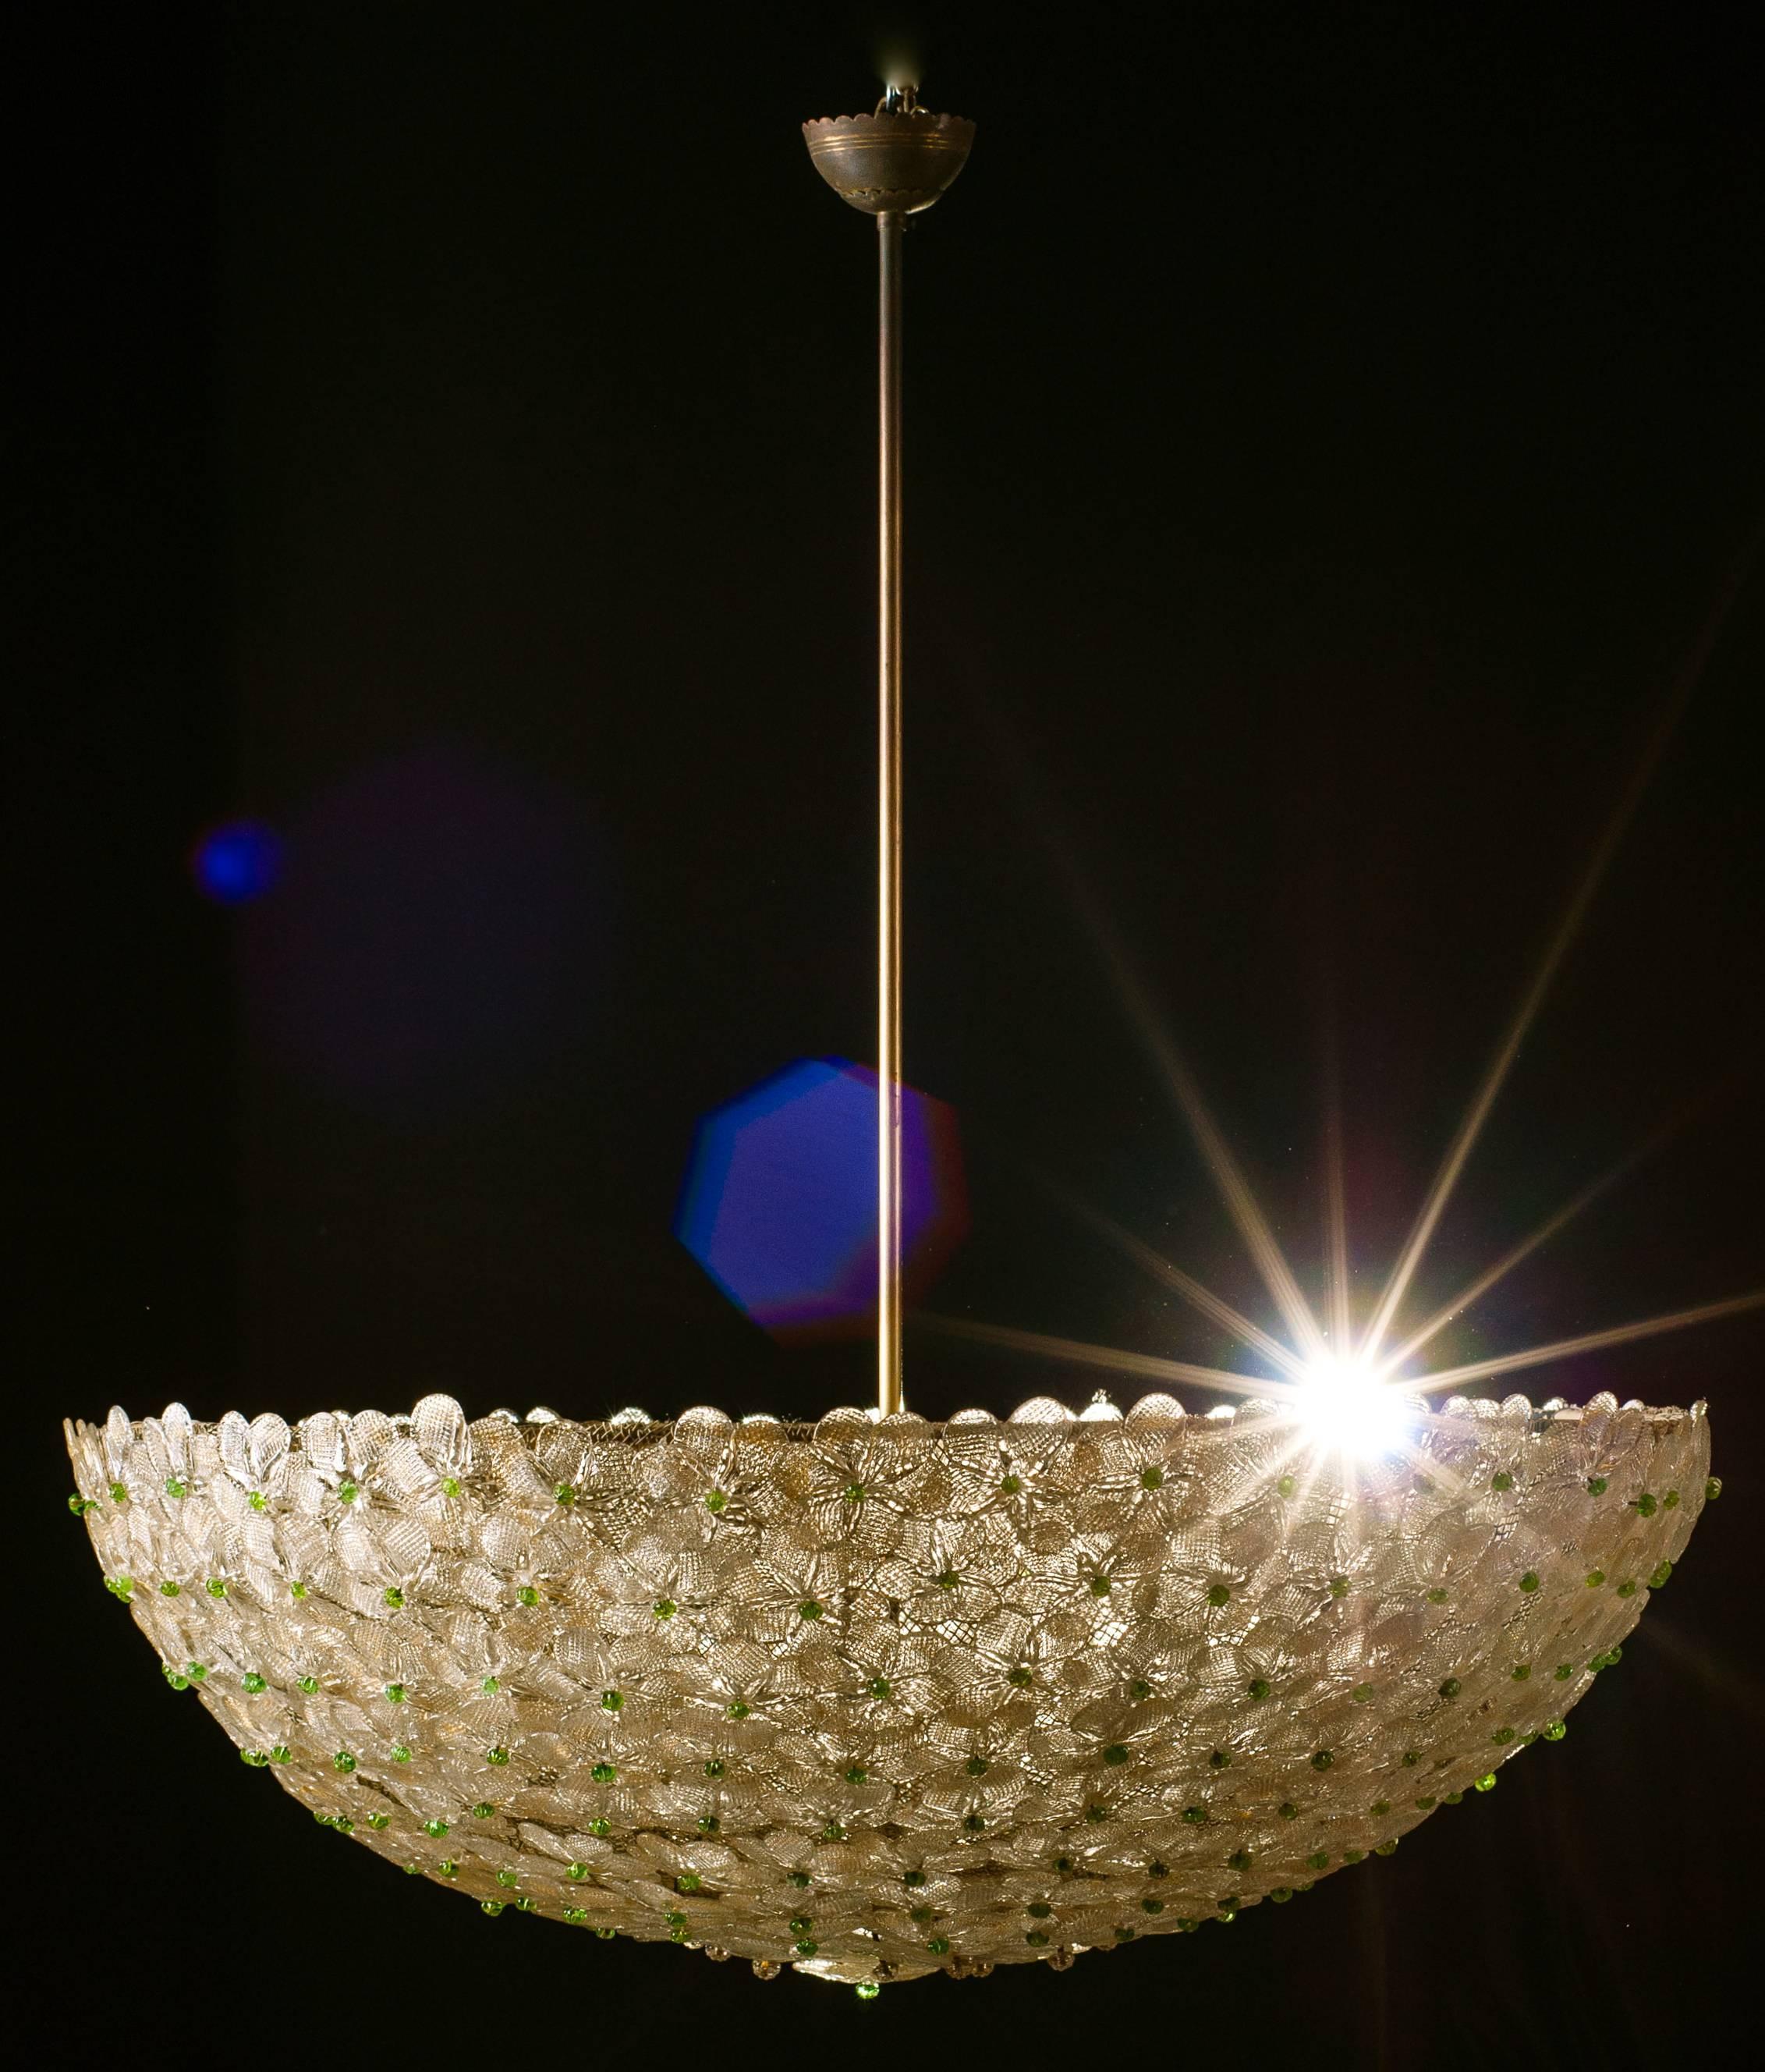 Extraordinary ceiling lamp in the shape of an inverted umbrella. And it composed of hundreds of small roses in glass Murano.

Diameter of 80 cm, height of 40 cm without the rod, with rod 110 cm.

Without the rod can be used as ceiling.